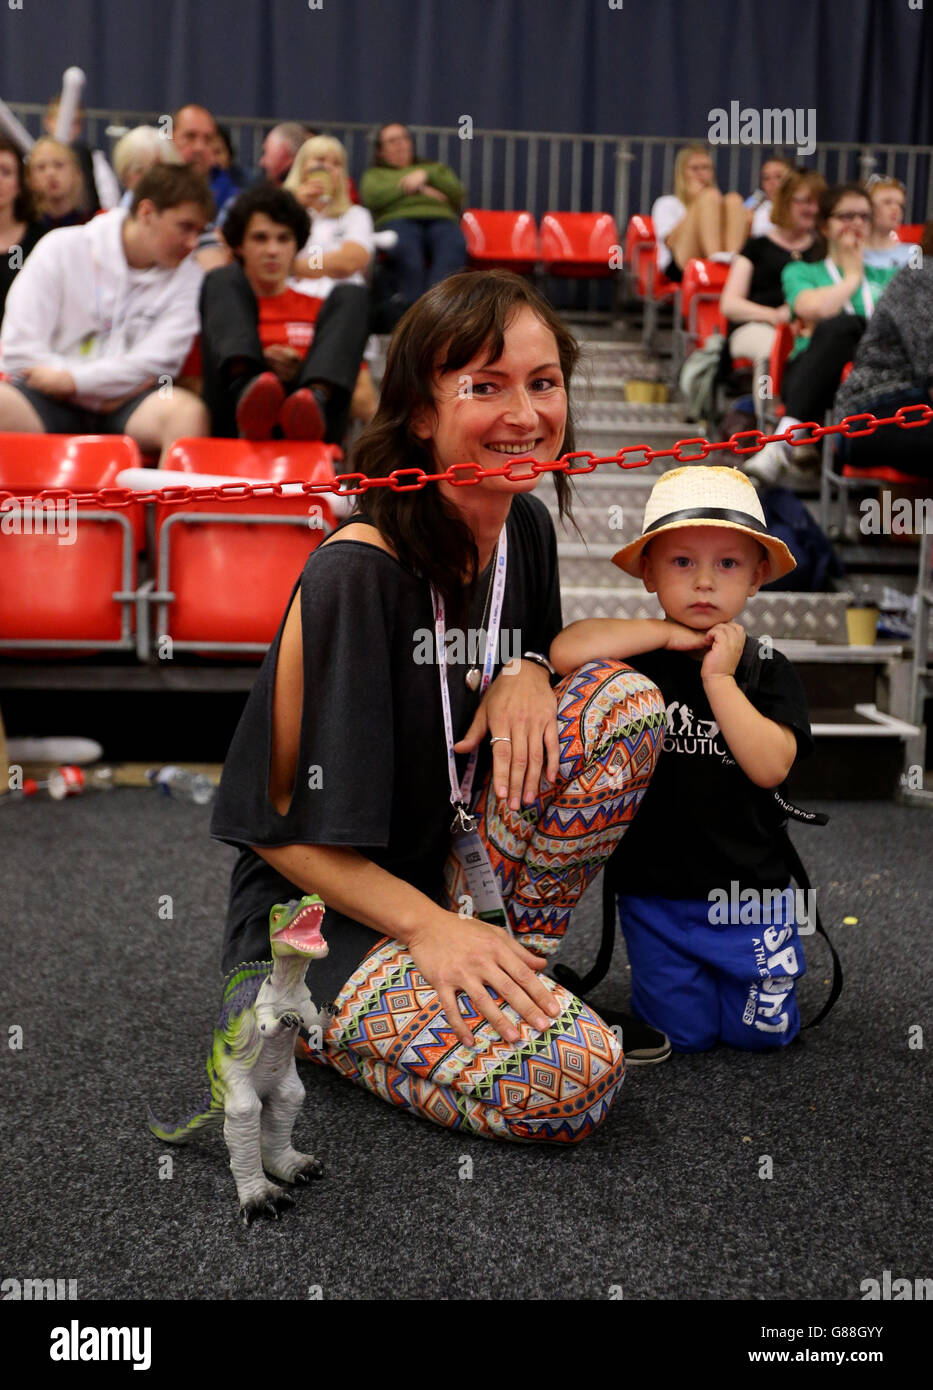 England's Kasjan Paszkowski's (not pictured) mother and brother watching the Mixed Epee Final at the Fencing during the Sainsbury's 2015 School Games in Manchester. PRESS ASSOCIATION Photo. Picture date: Saturday September 5, 2015. Photo credit should read: Steven Paston/PA Wire Stock Photo